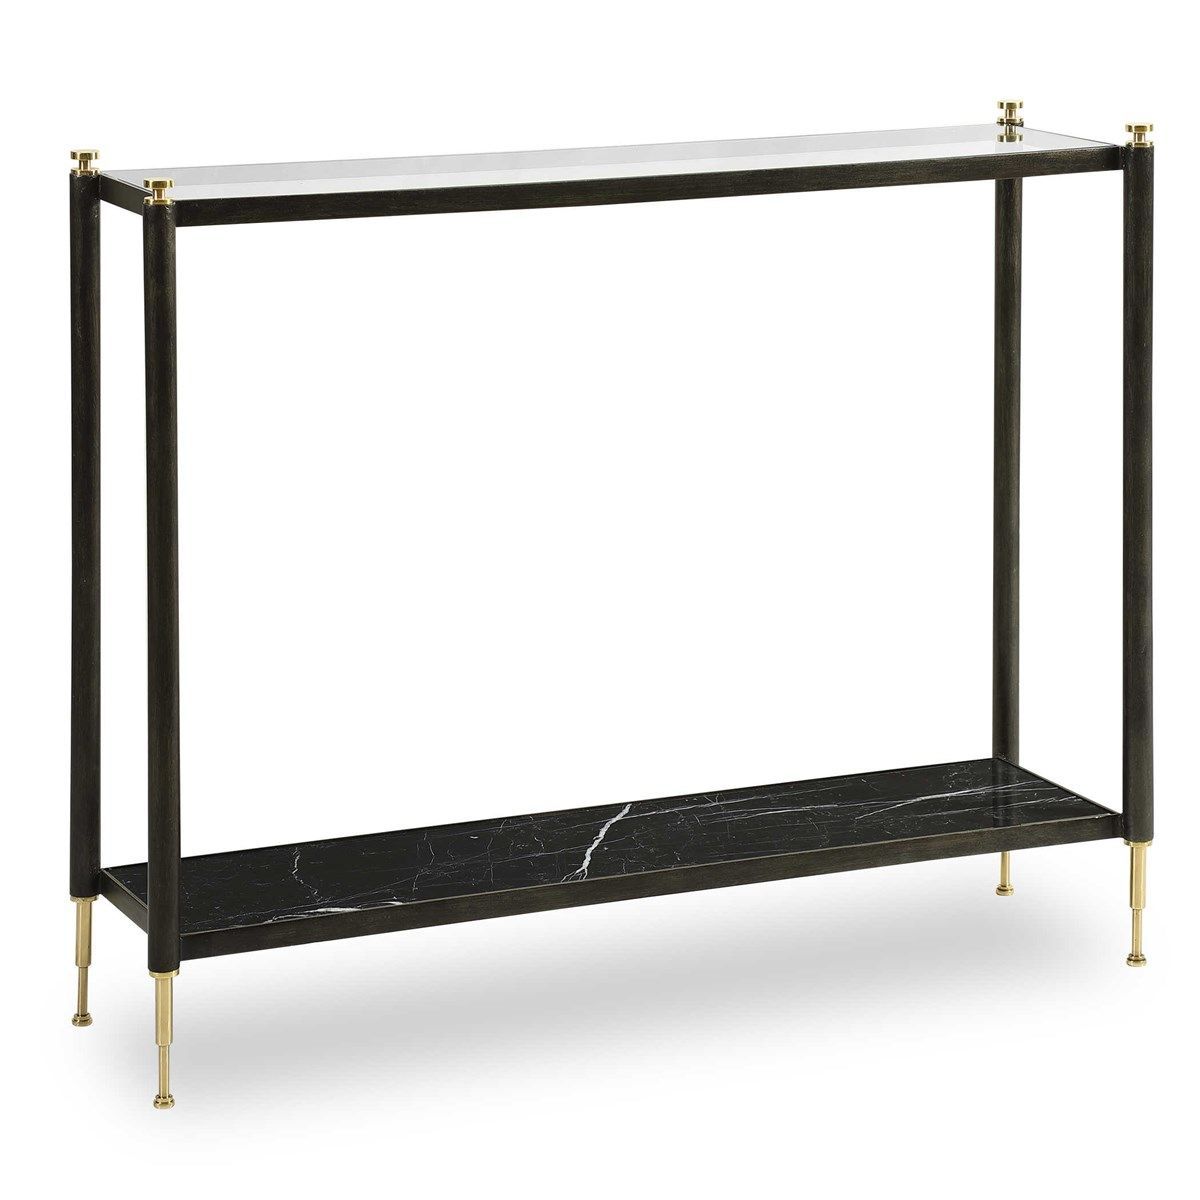 Viceroy Console Table | Uttermost In 2020 | Console Table For Black And White Console Tables (View 16 of 20)